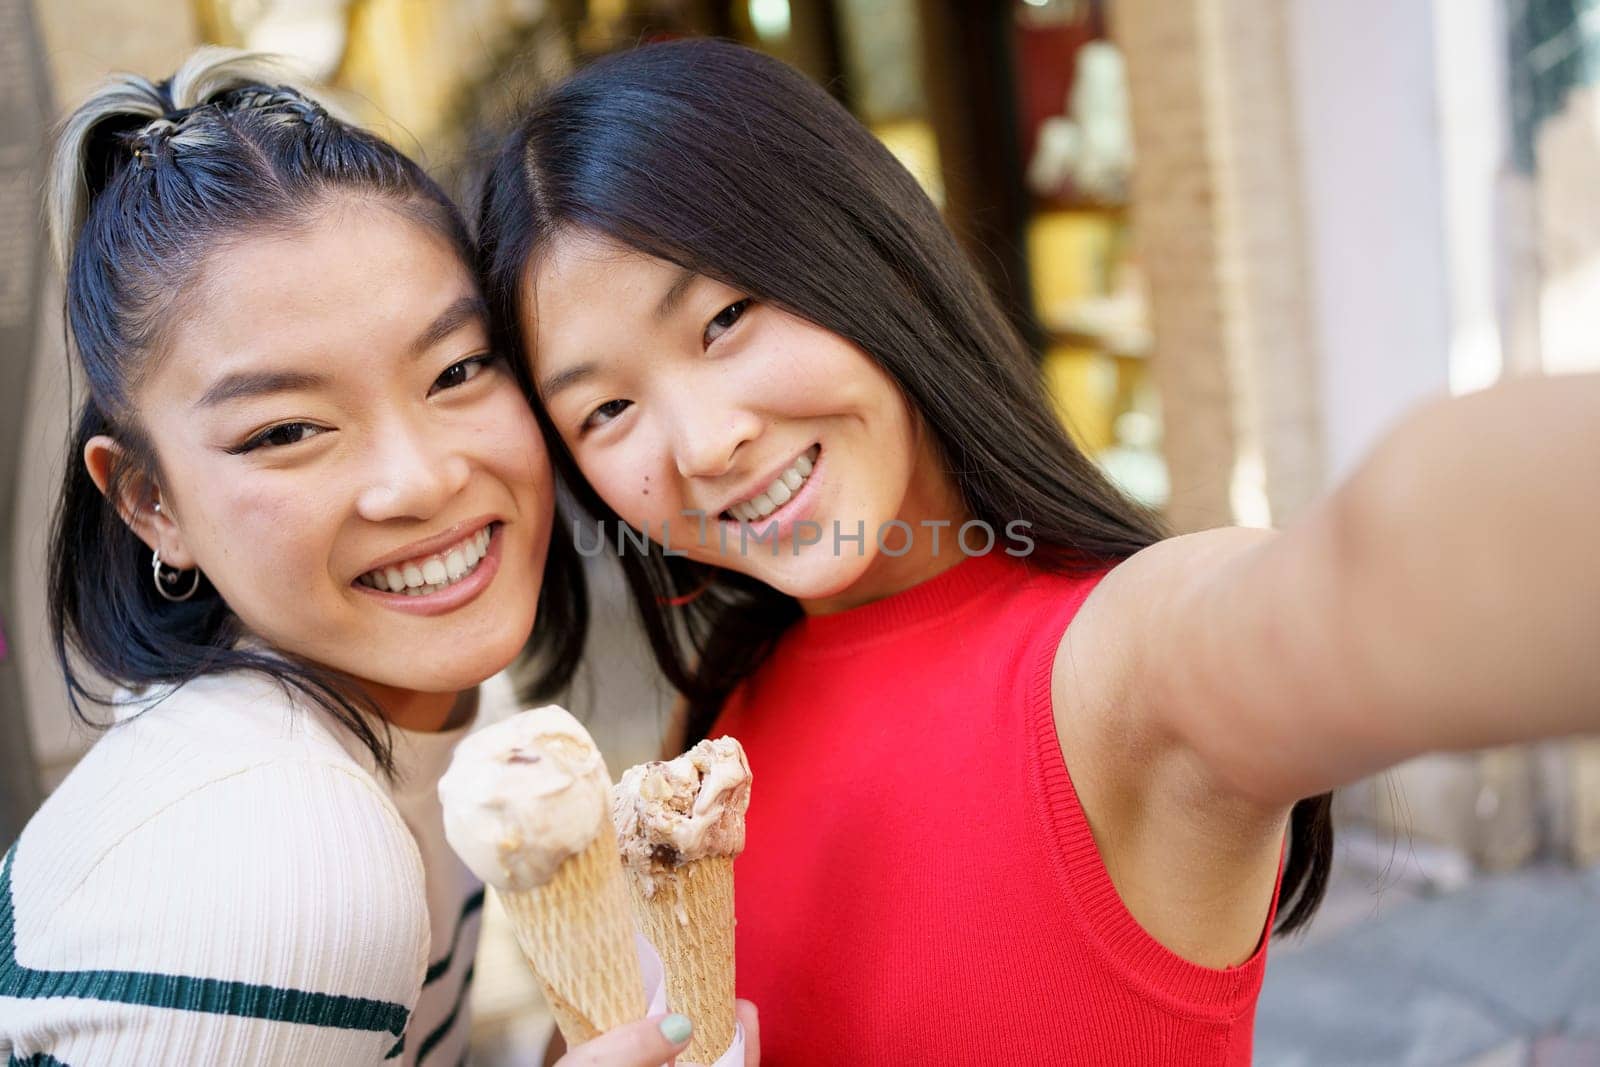 Positive young Asian women smiling happily and taking selfie while eating delicious ice cream cone together in street